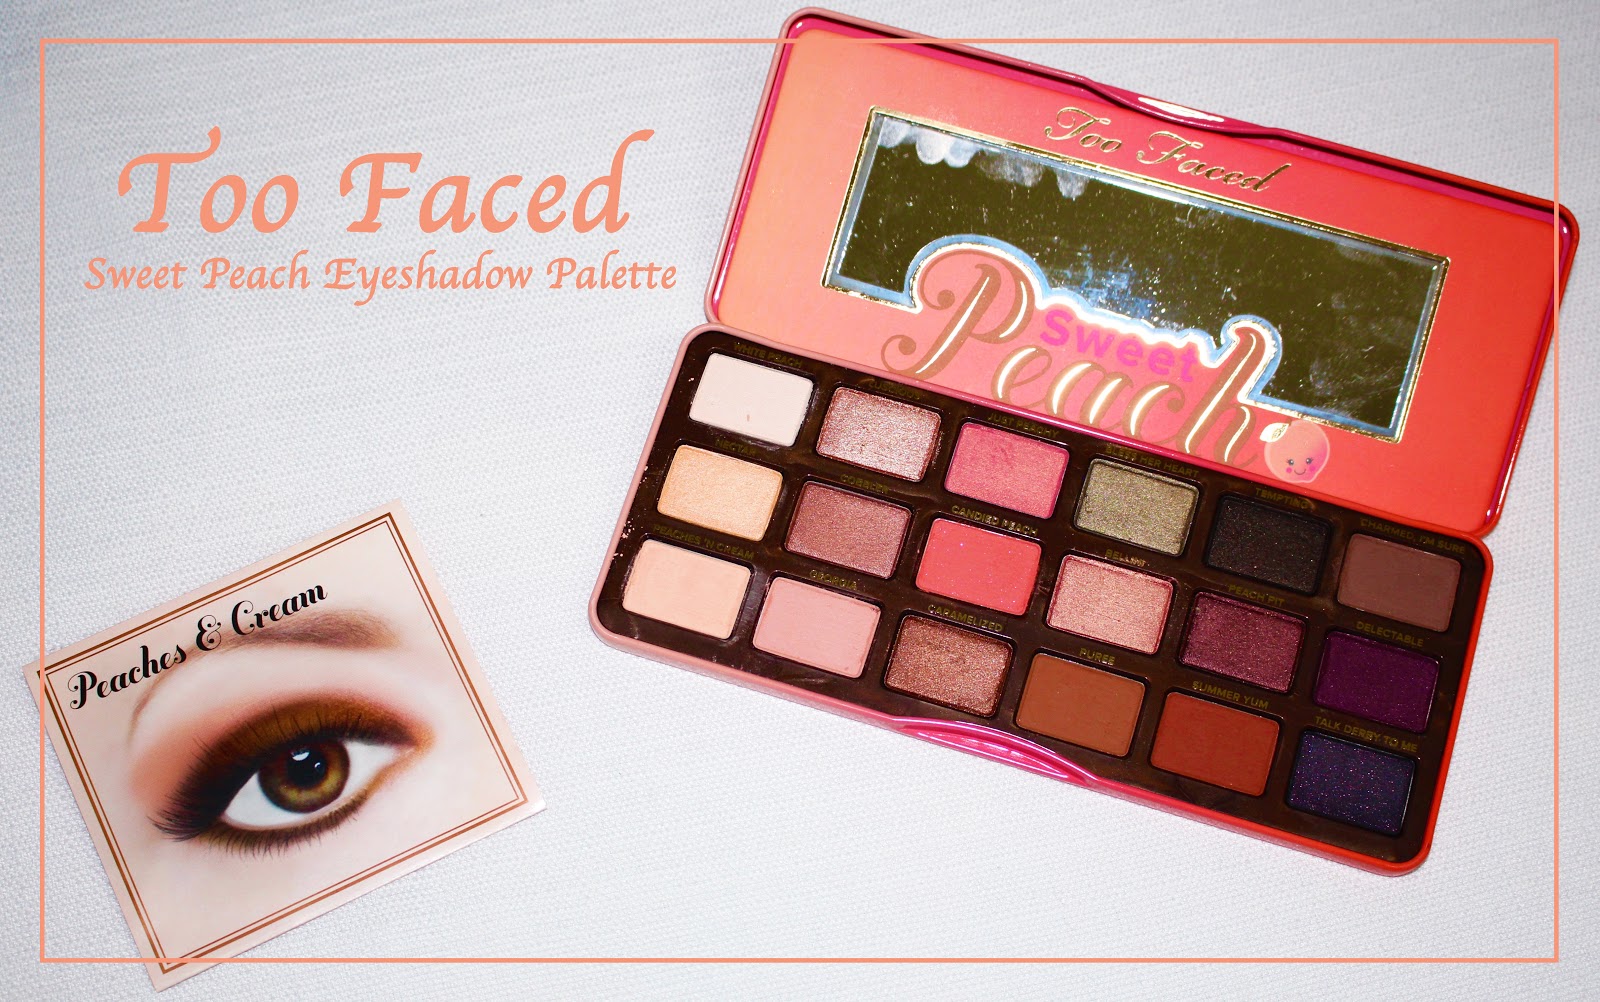 Too Faced] Sweet Peach Eyeshadow Palette Review